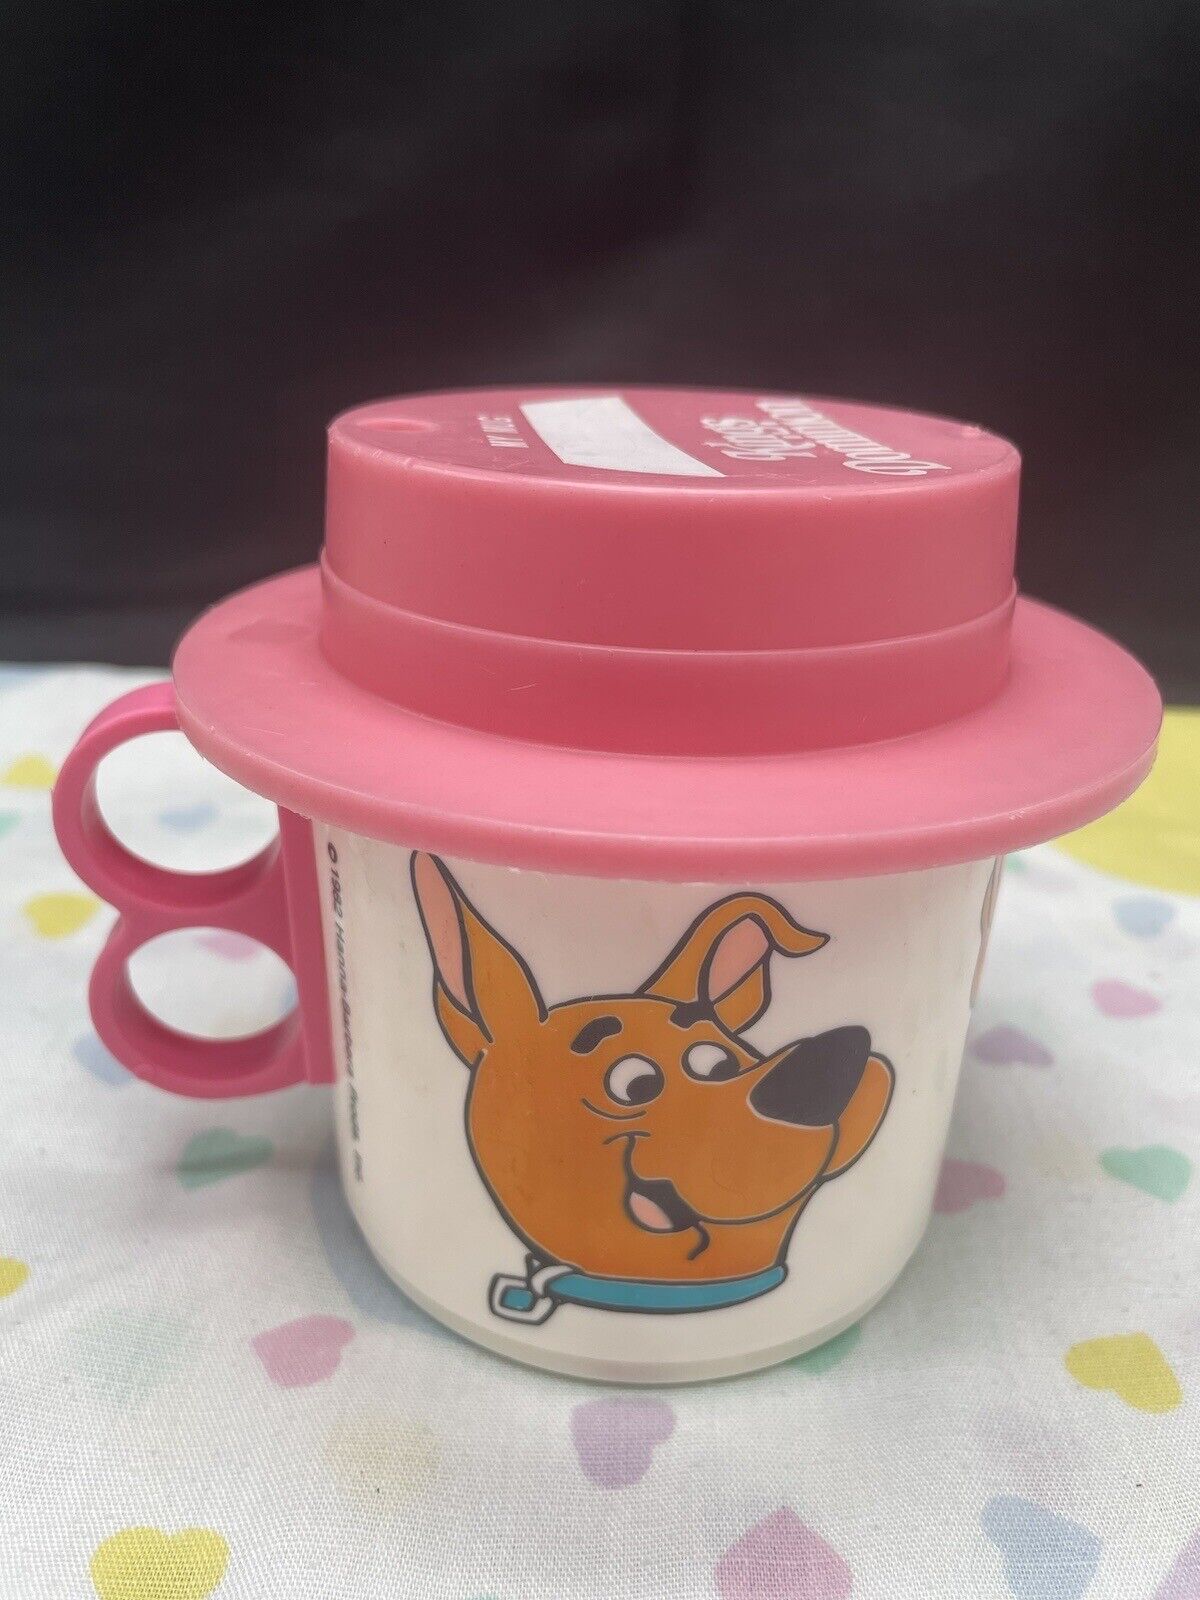 1982 Vintage Scrappy Doo Kings Dominion Children’s Plastic Cup w/ Lid